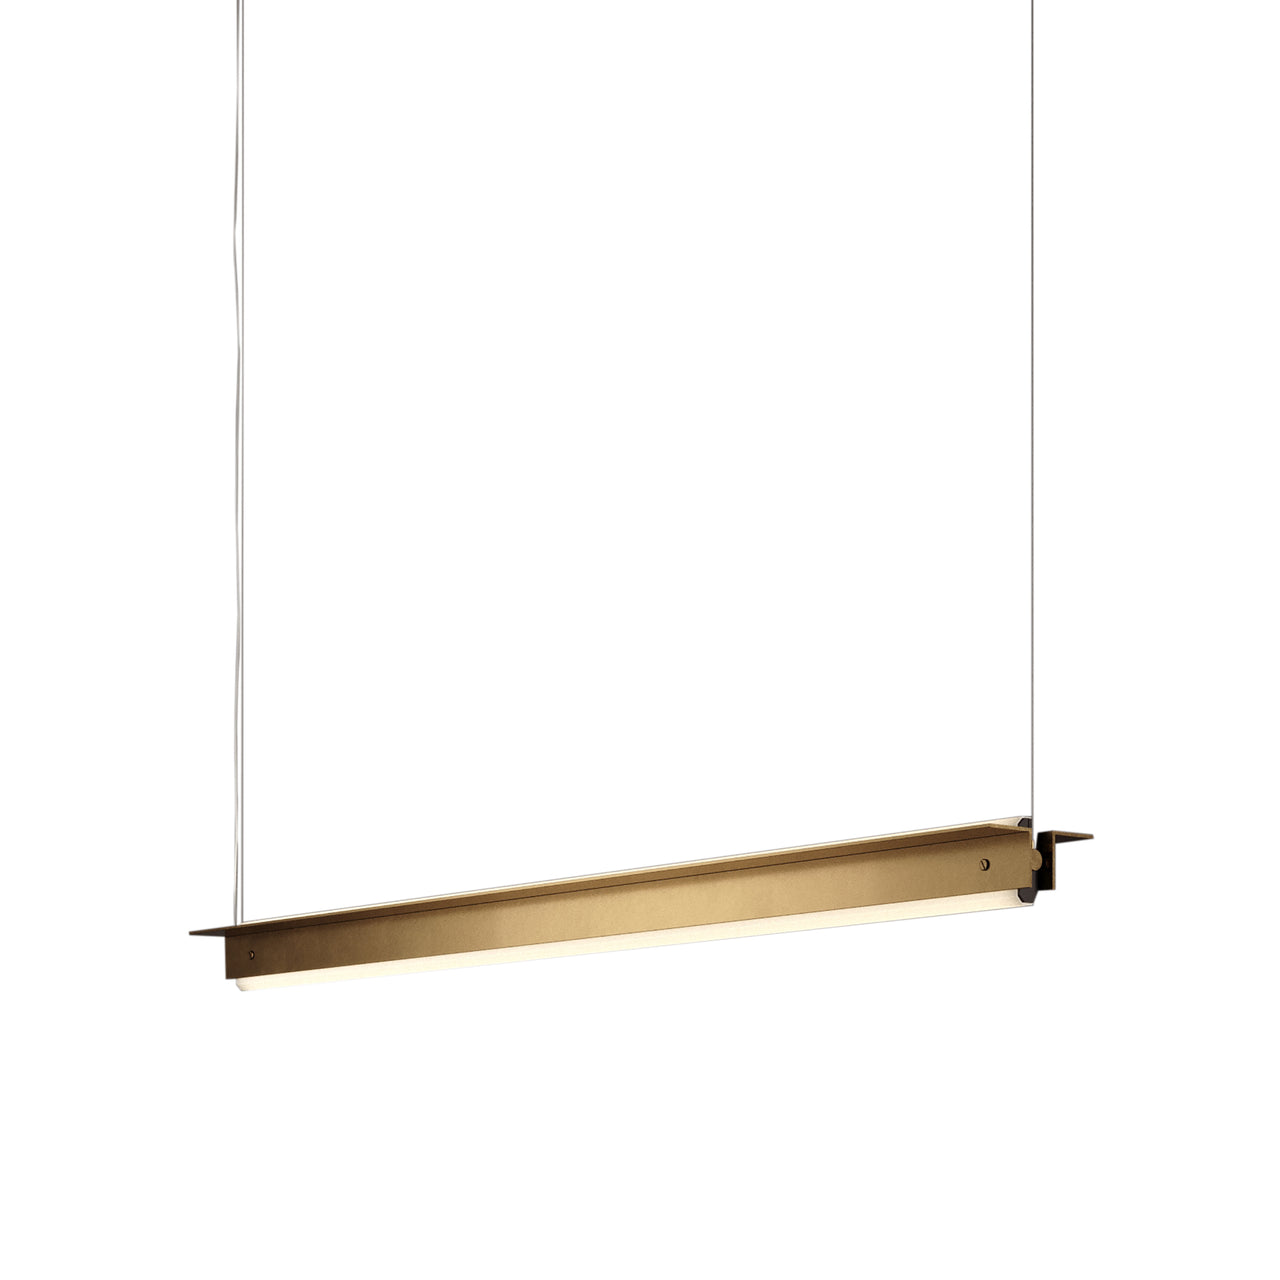 Axis T Suspension Light: Large - 48